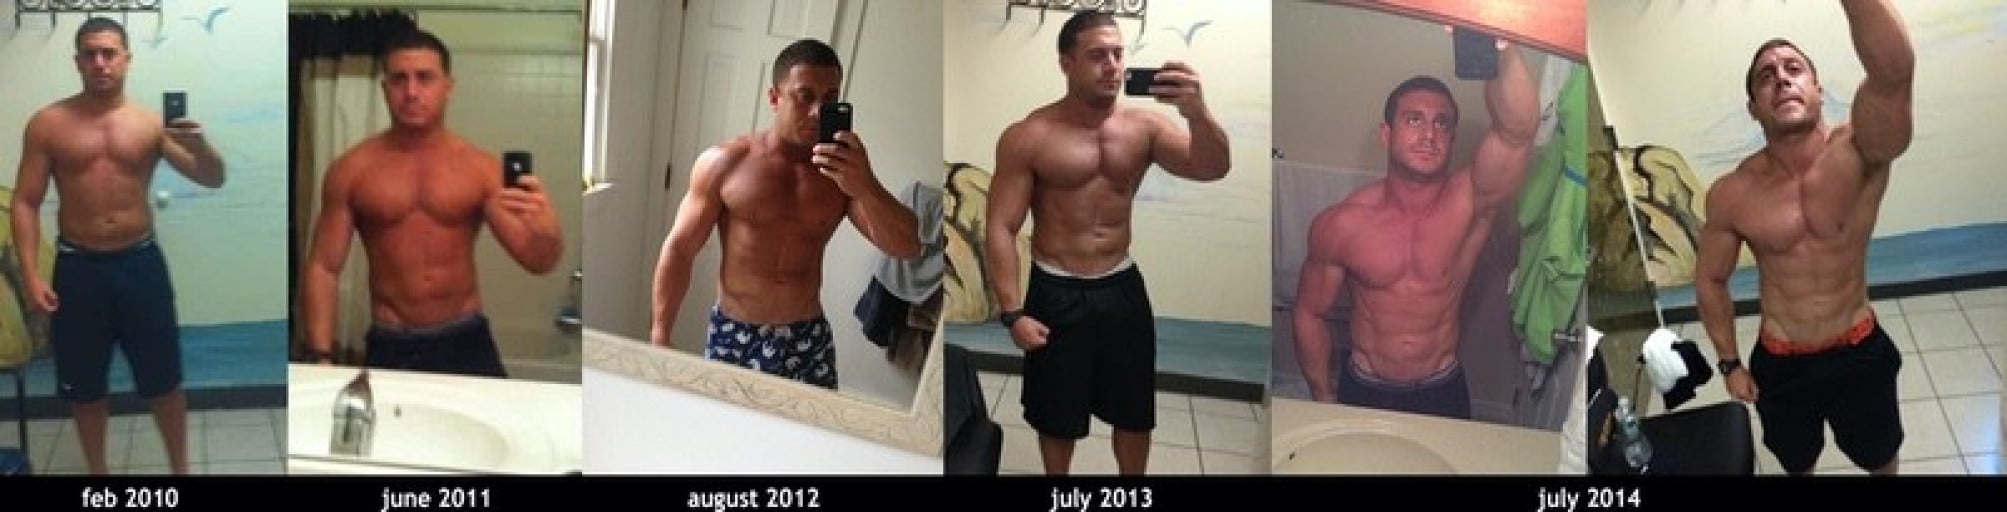 A progress pic of a 5'6" man showing a weight gain from 160 pounds to 174 pounds. A net gain of 14 pounds.